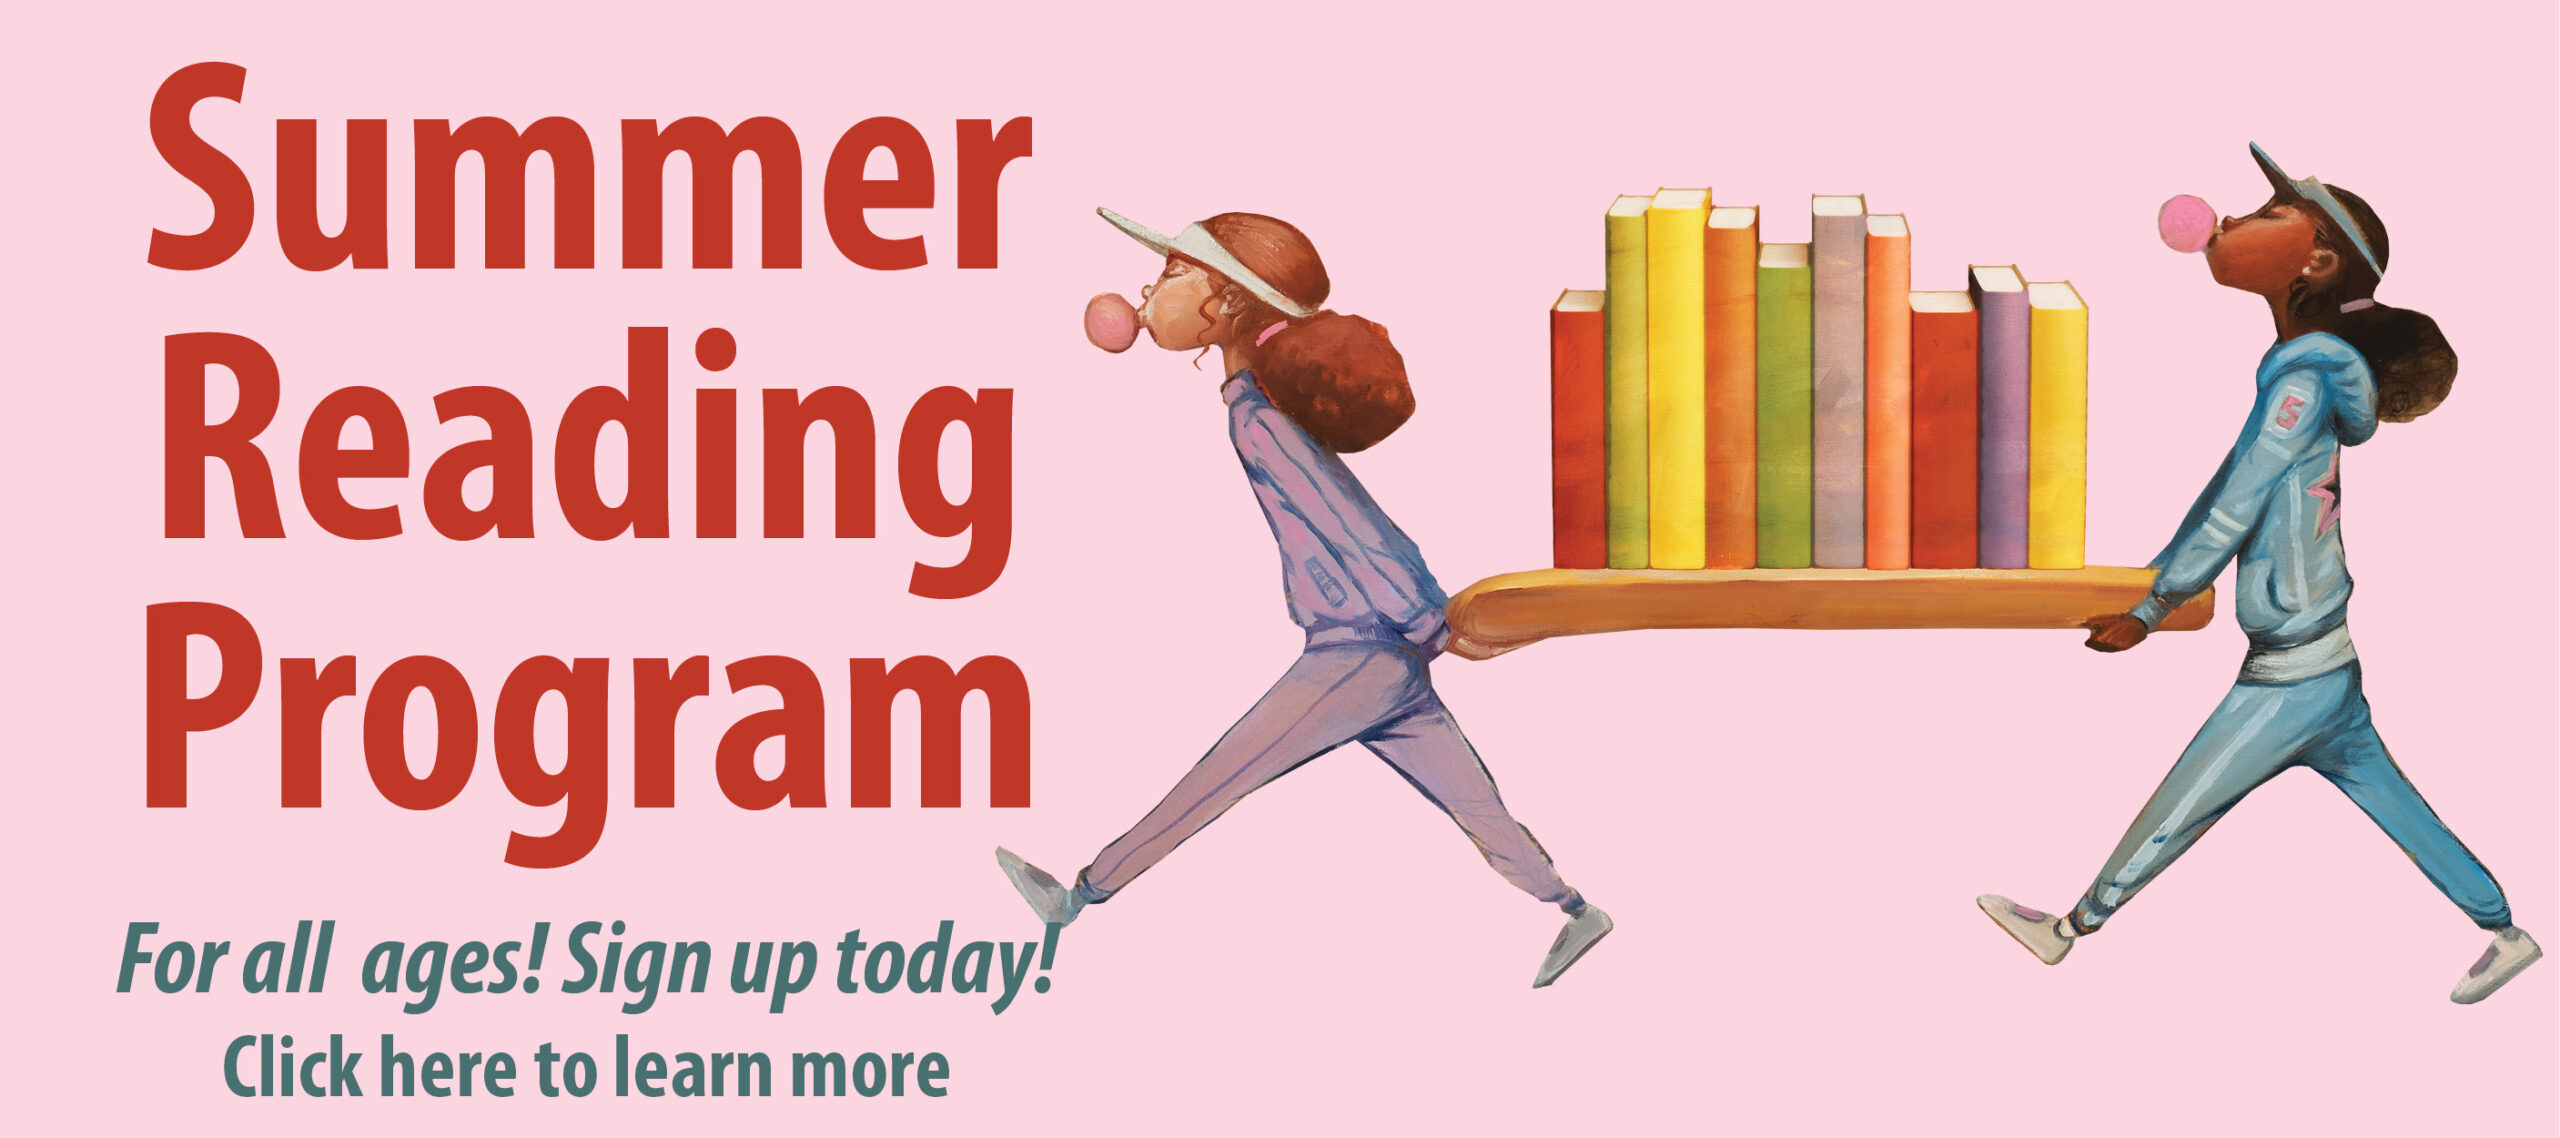 Image with text reading "Summer Reading Program. For All Ages. Sign up Today!" Two girls blow bubbles with bubble gum and carry a row of books between them on a plank of wood.